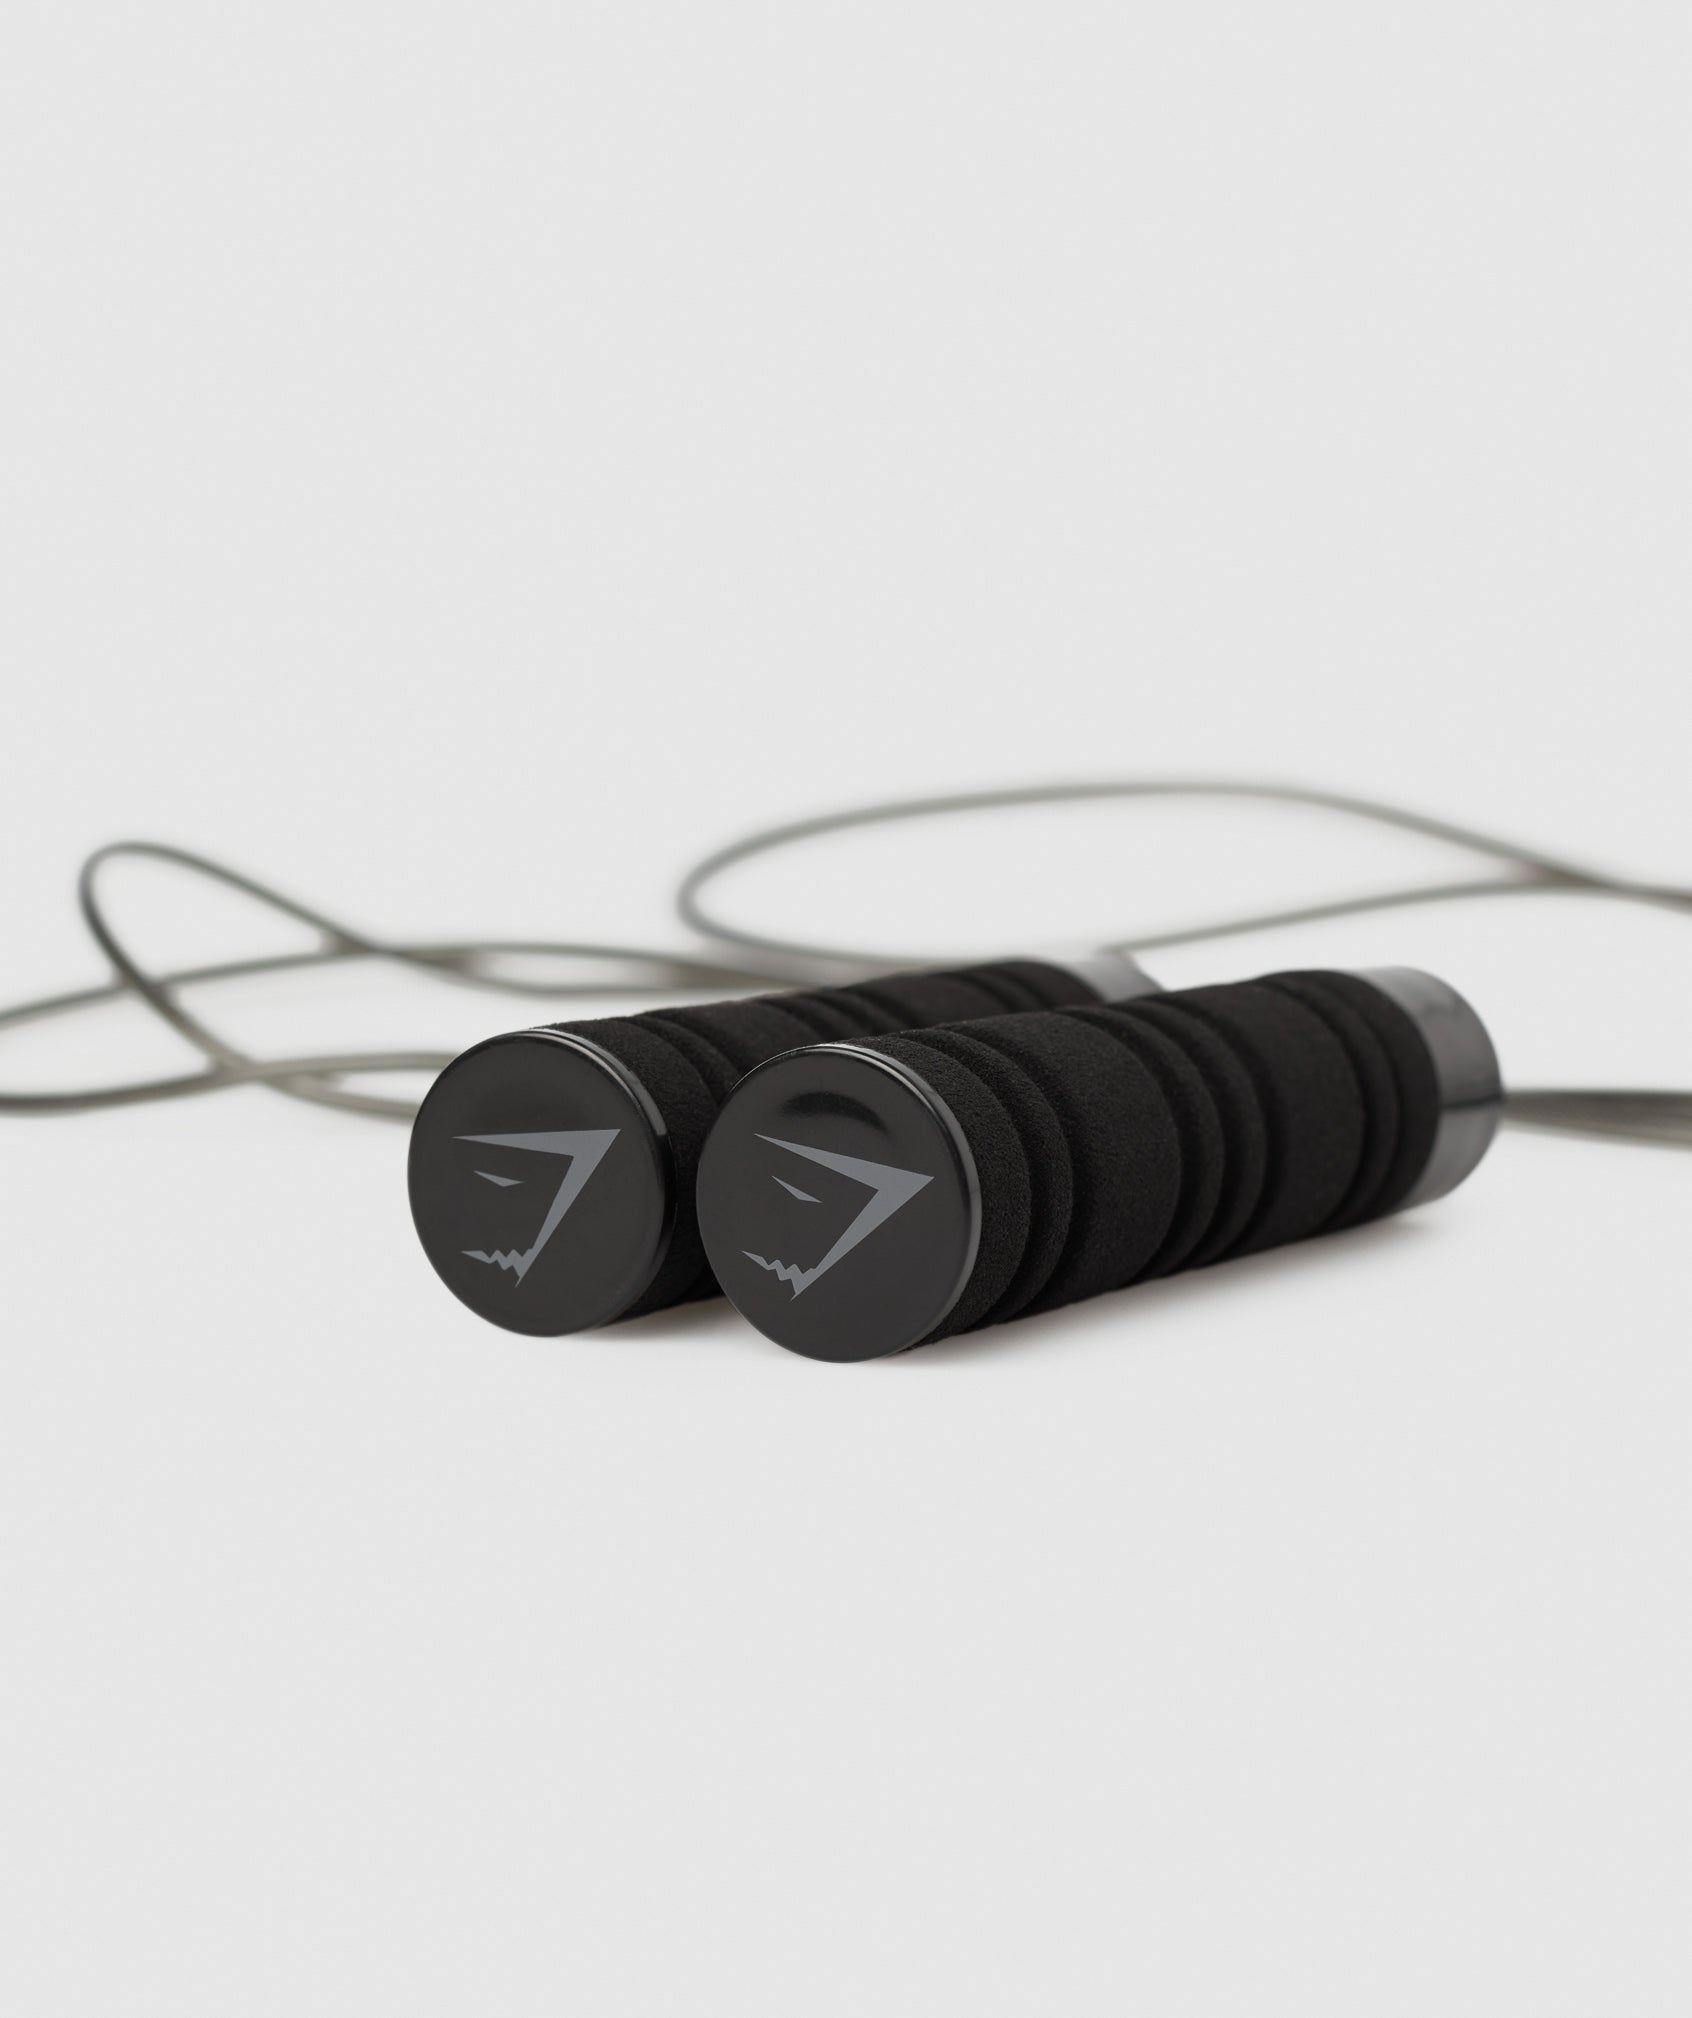 Weighted Skipping Rope in Black - view 5